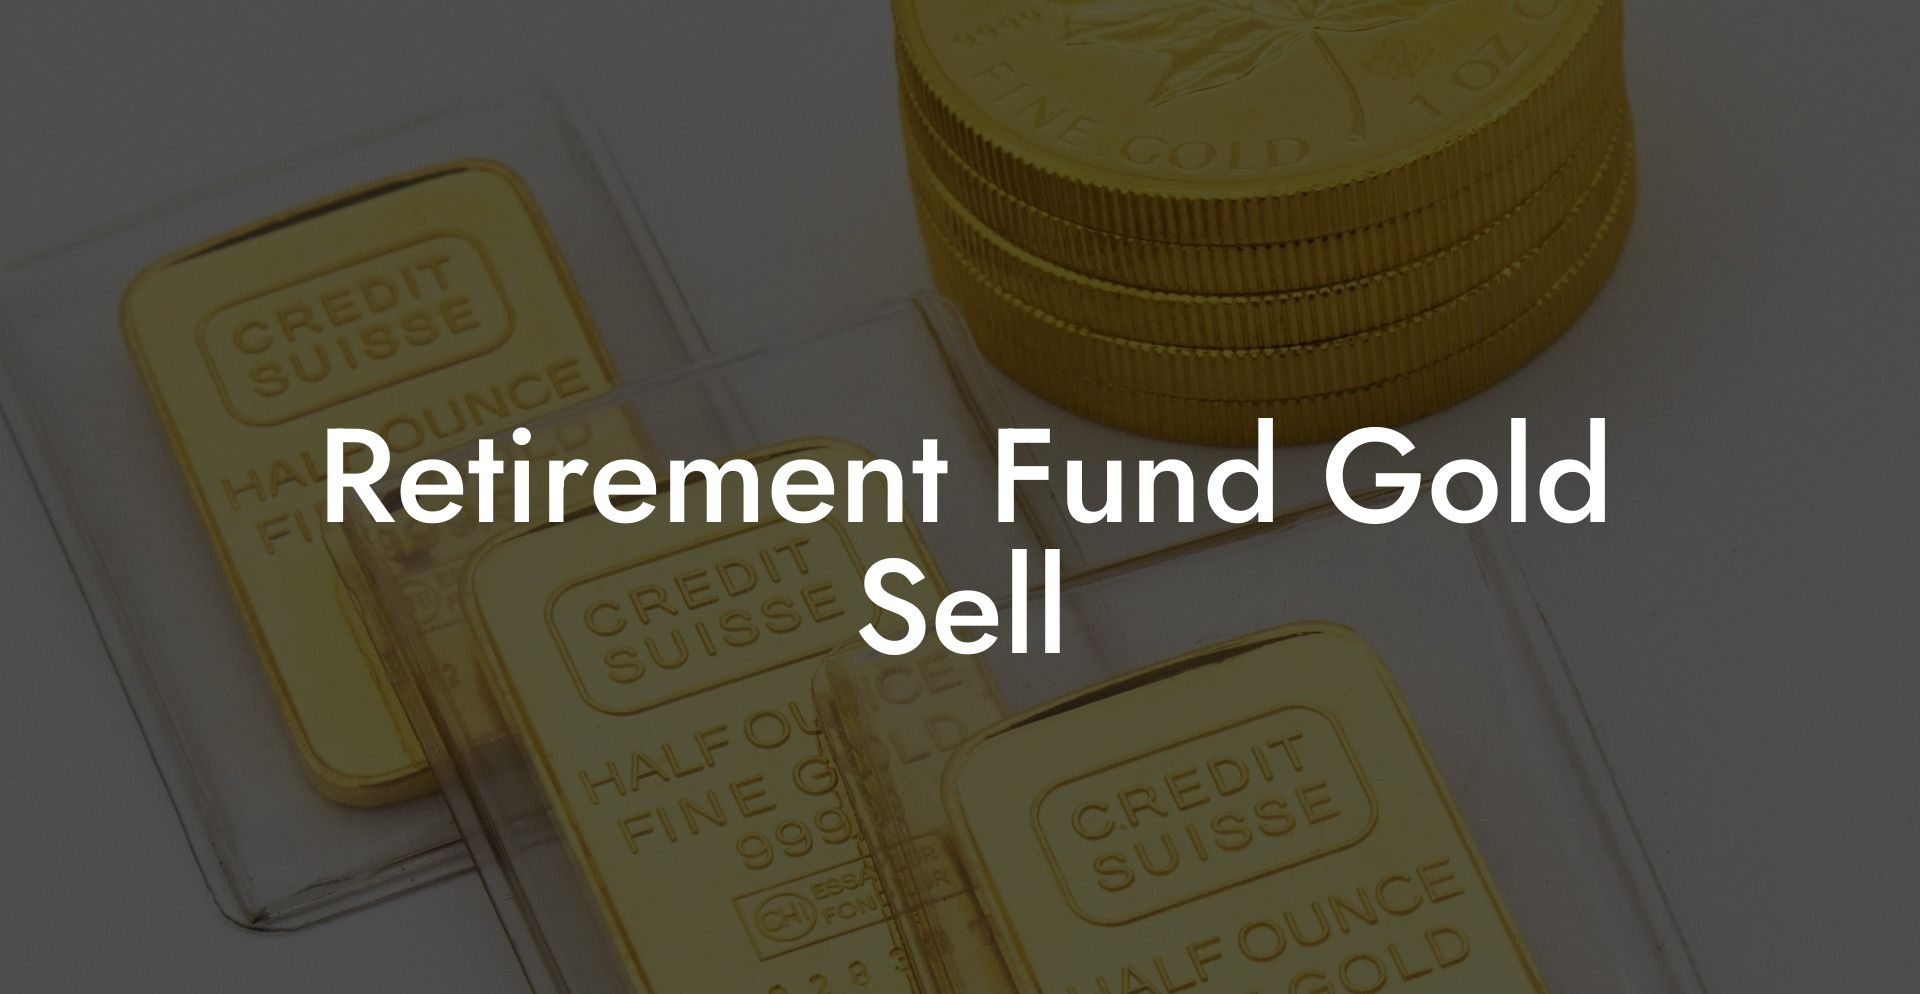 Retirement Fund Gold Sell